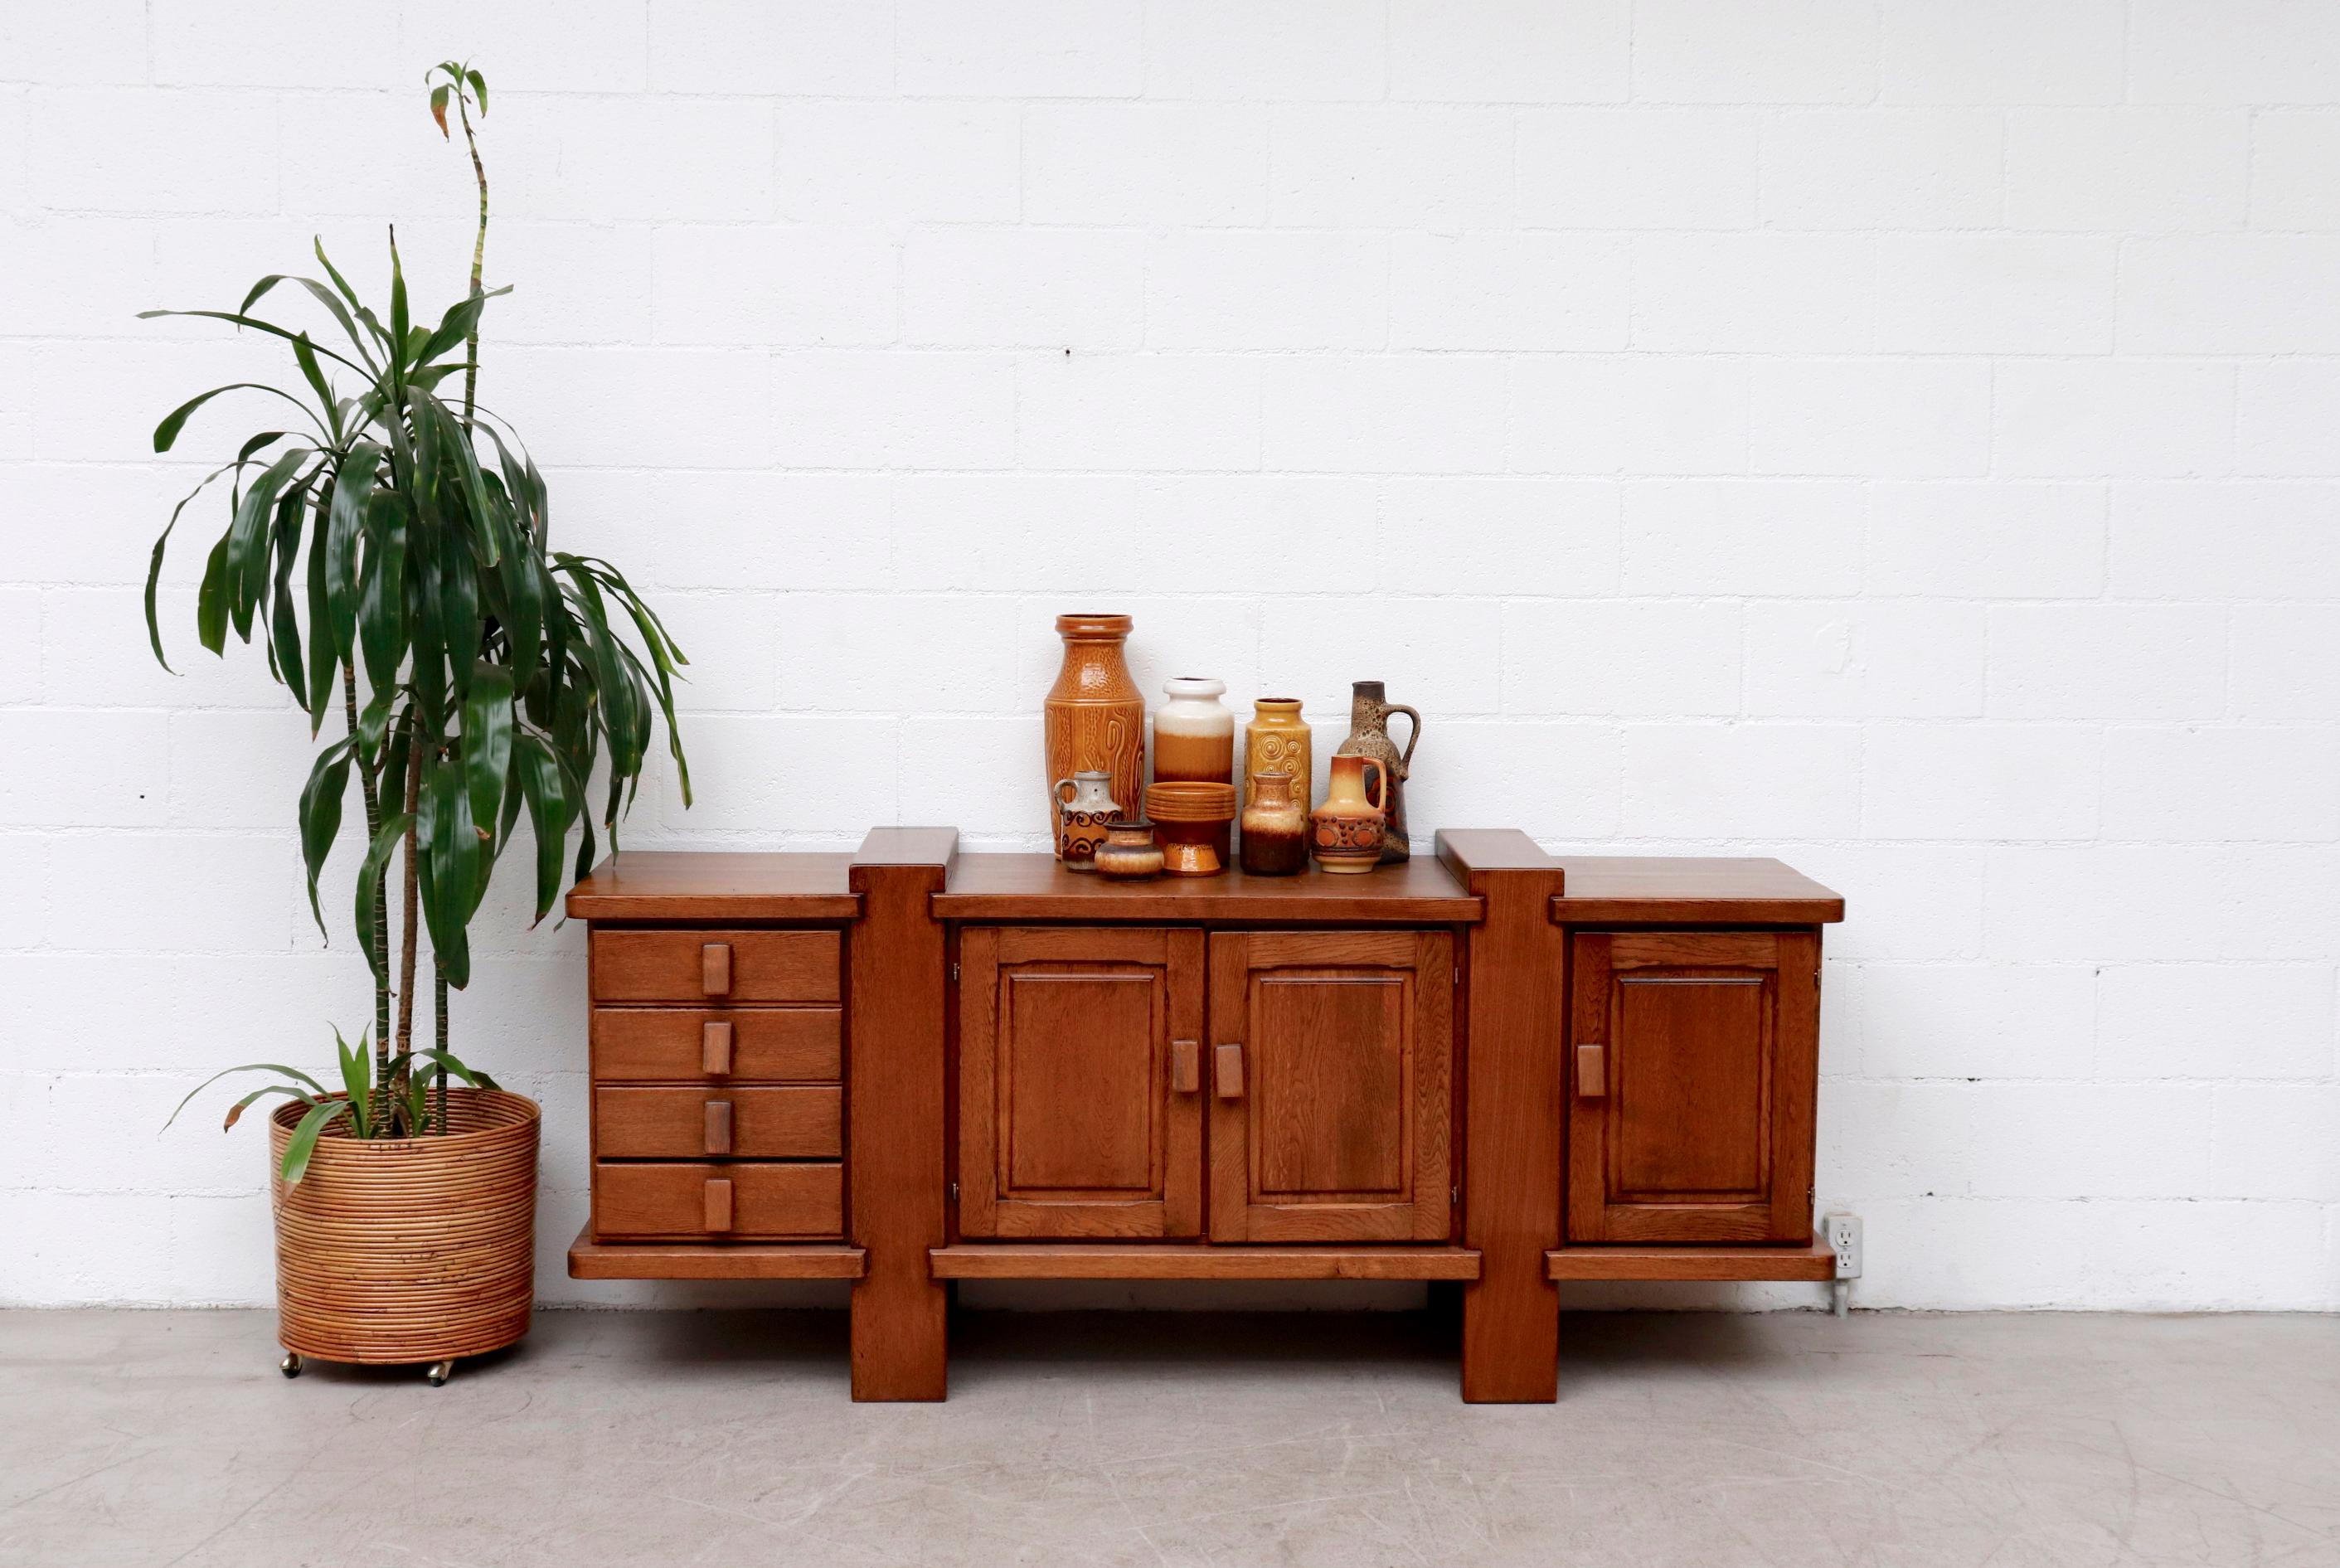 Beautiful mid-century Pierre Chapo style oak credenza with stacked drawers and thick carved pulls. Rustic style and craftsmanship in original condition with wear consistent with its age and usage.